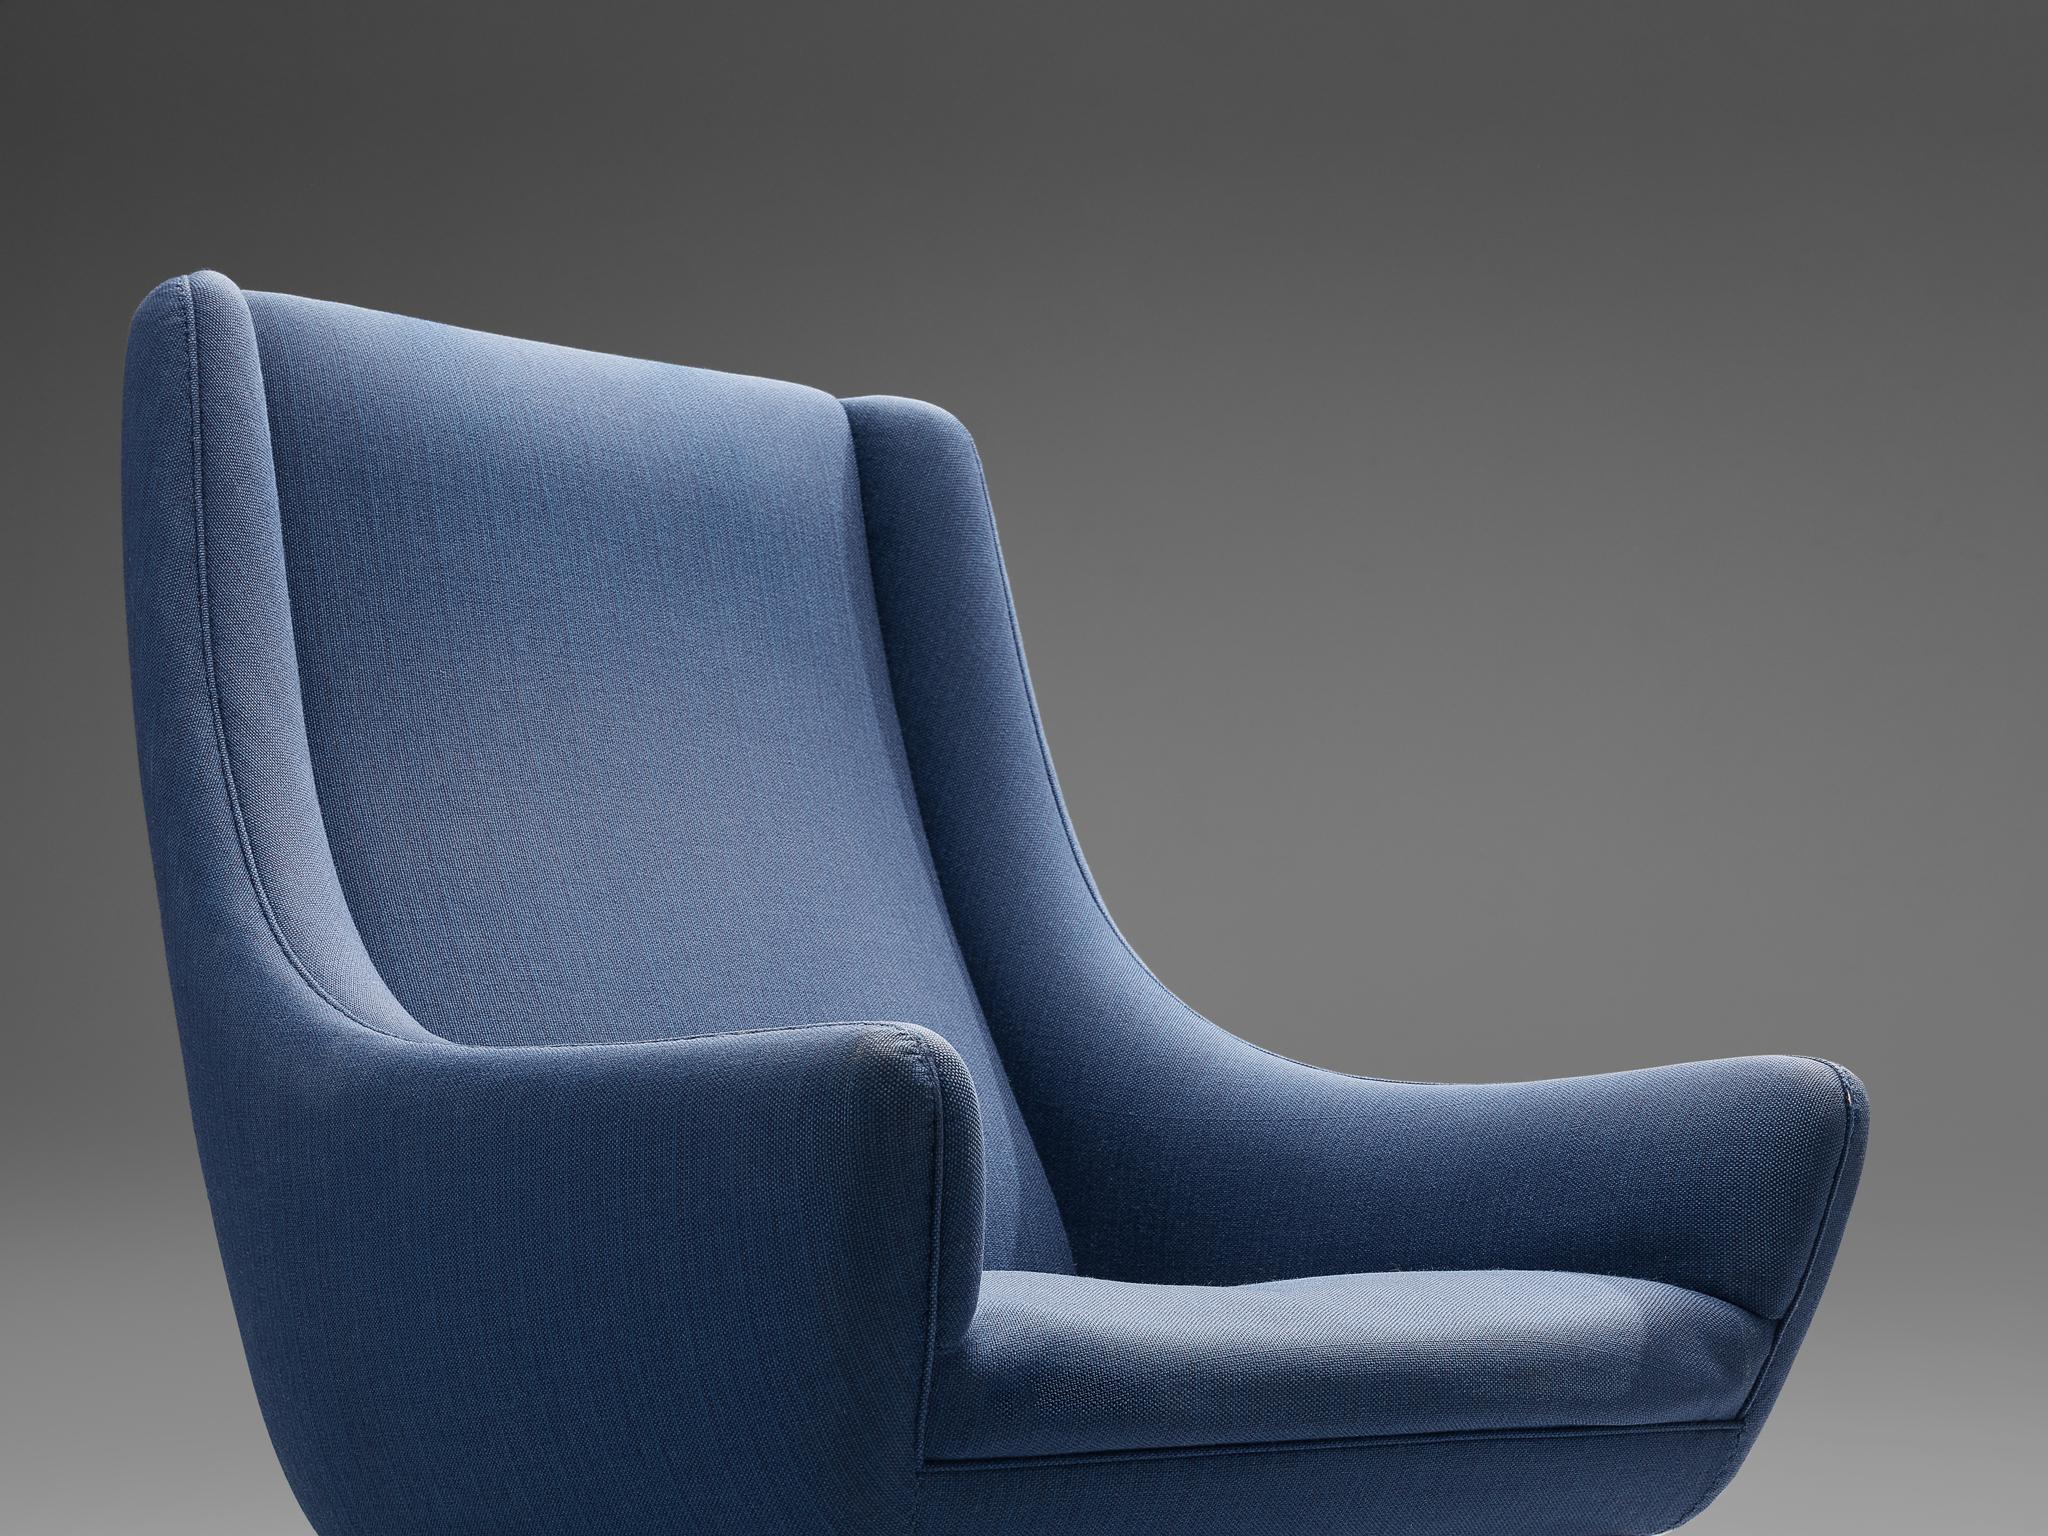 Fabric Illum Wikkelsø for A. Mikael Laursen & Søn Lounge Chair in Blue Upholstery